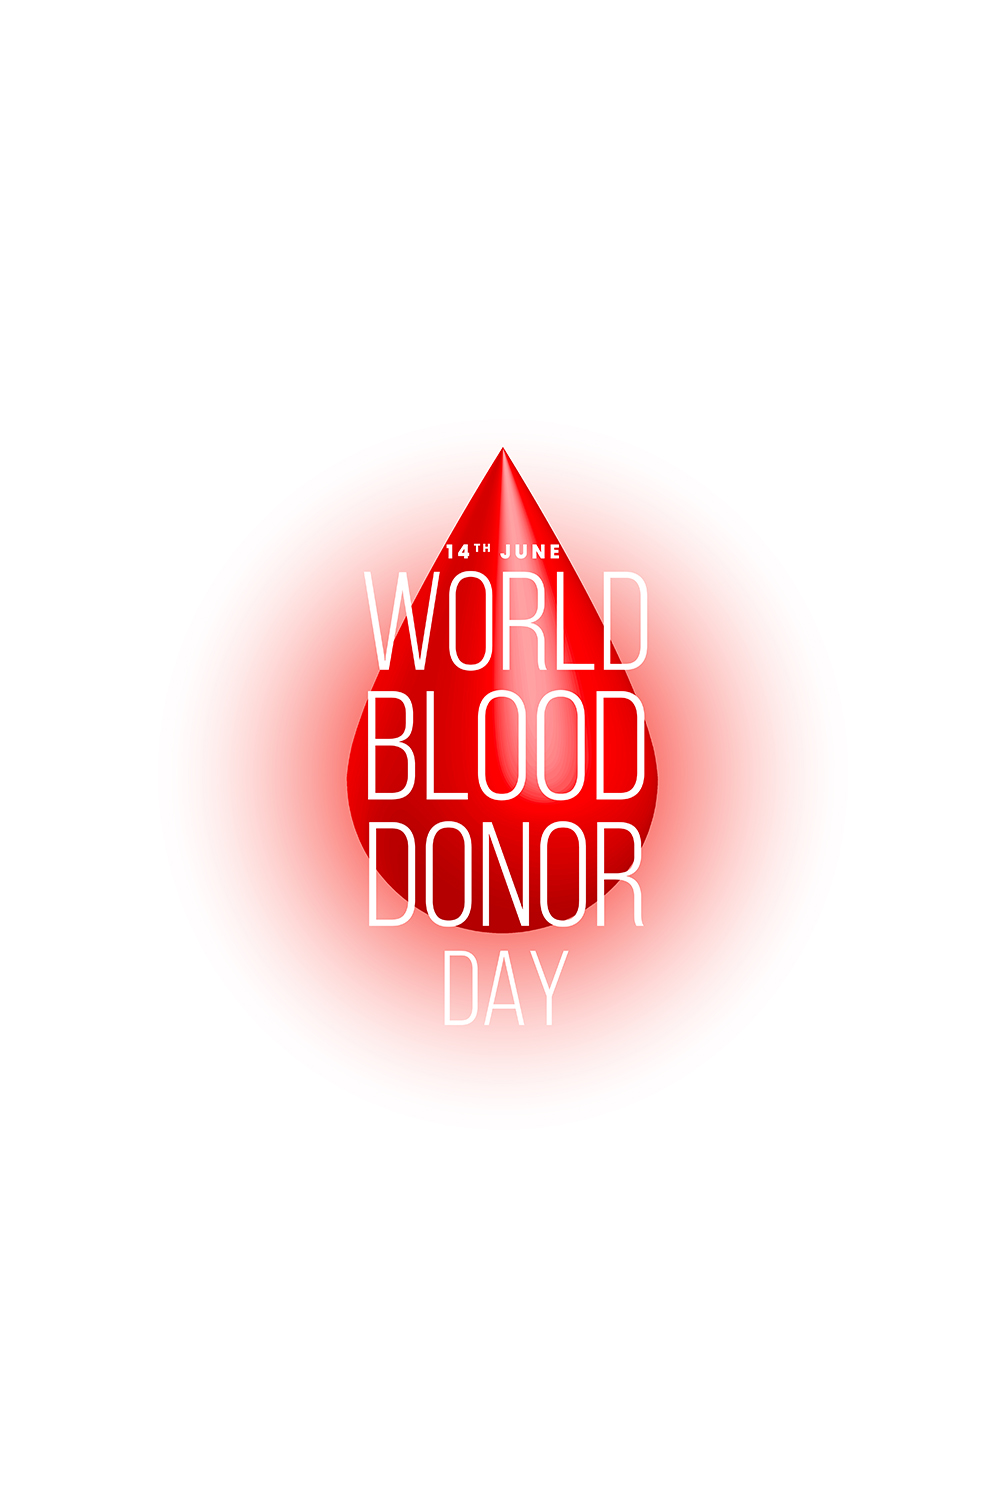 World blood donor day 3 design template pinterest preview image.